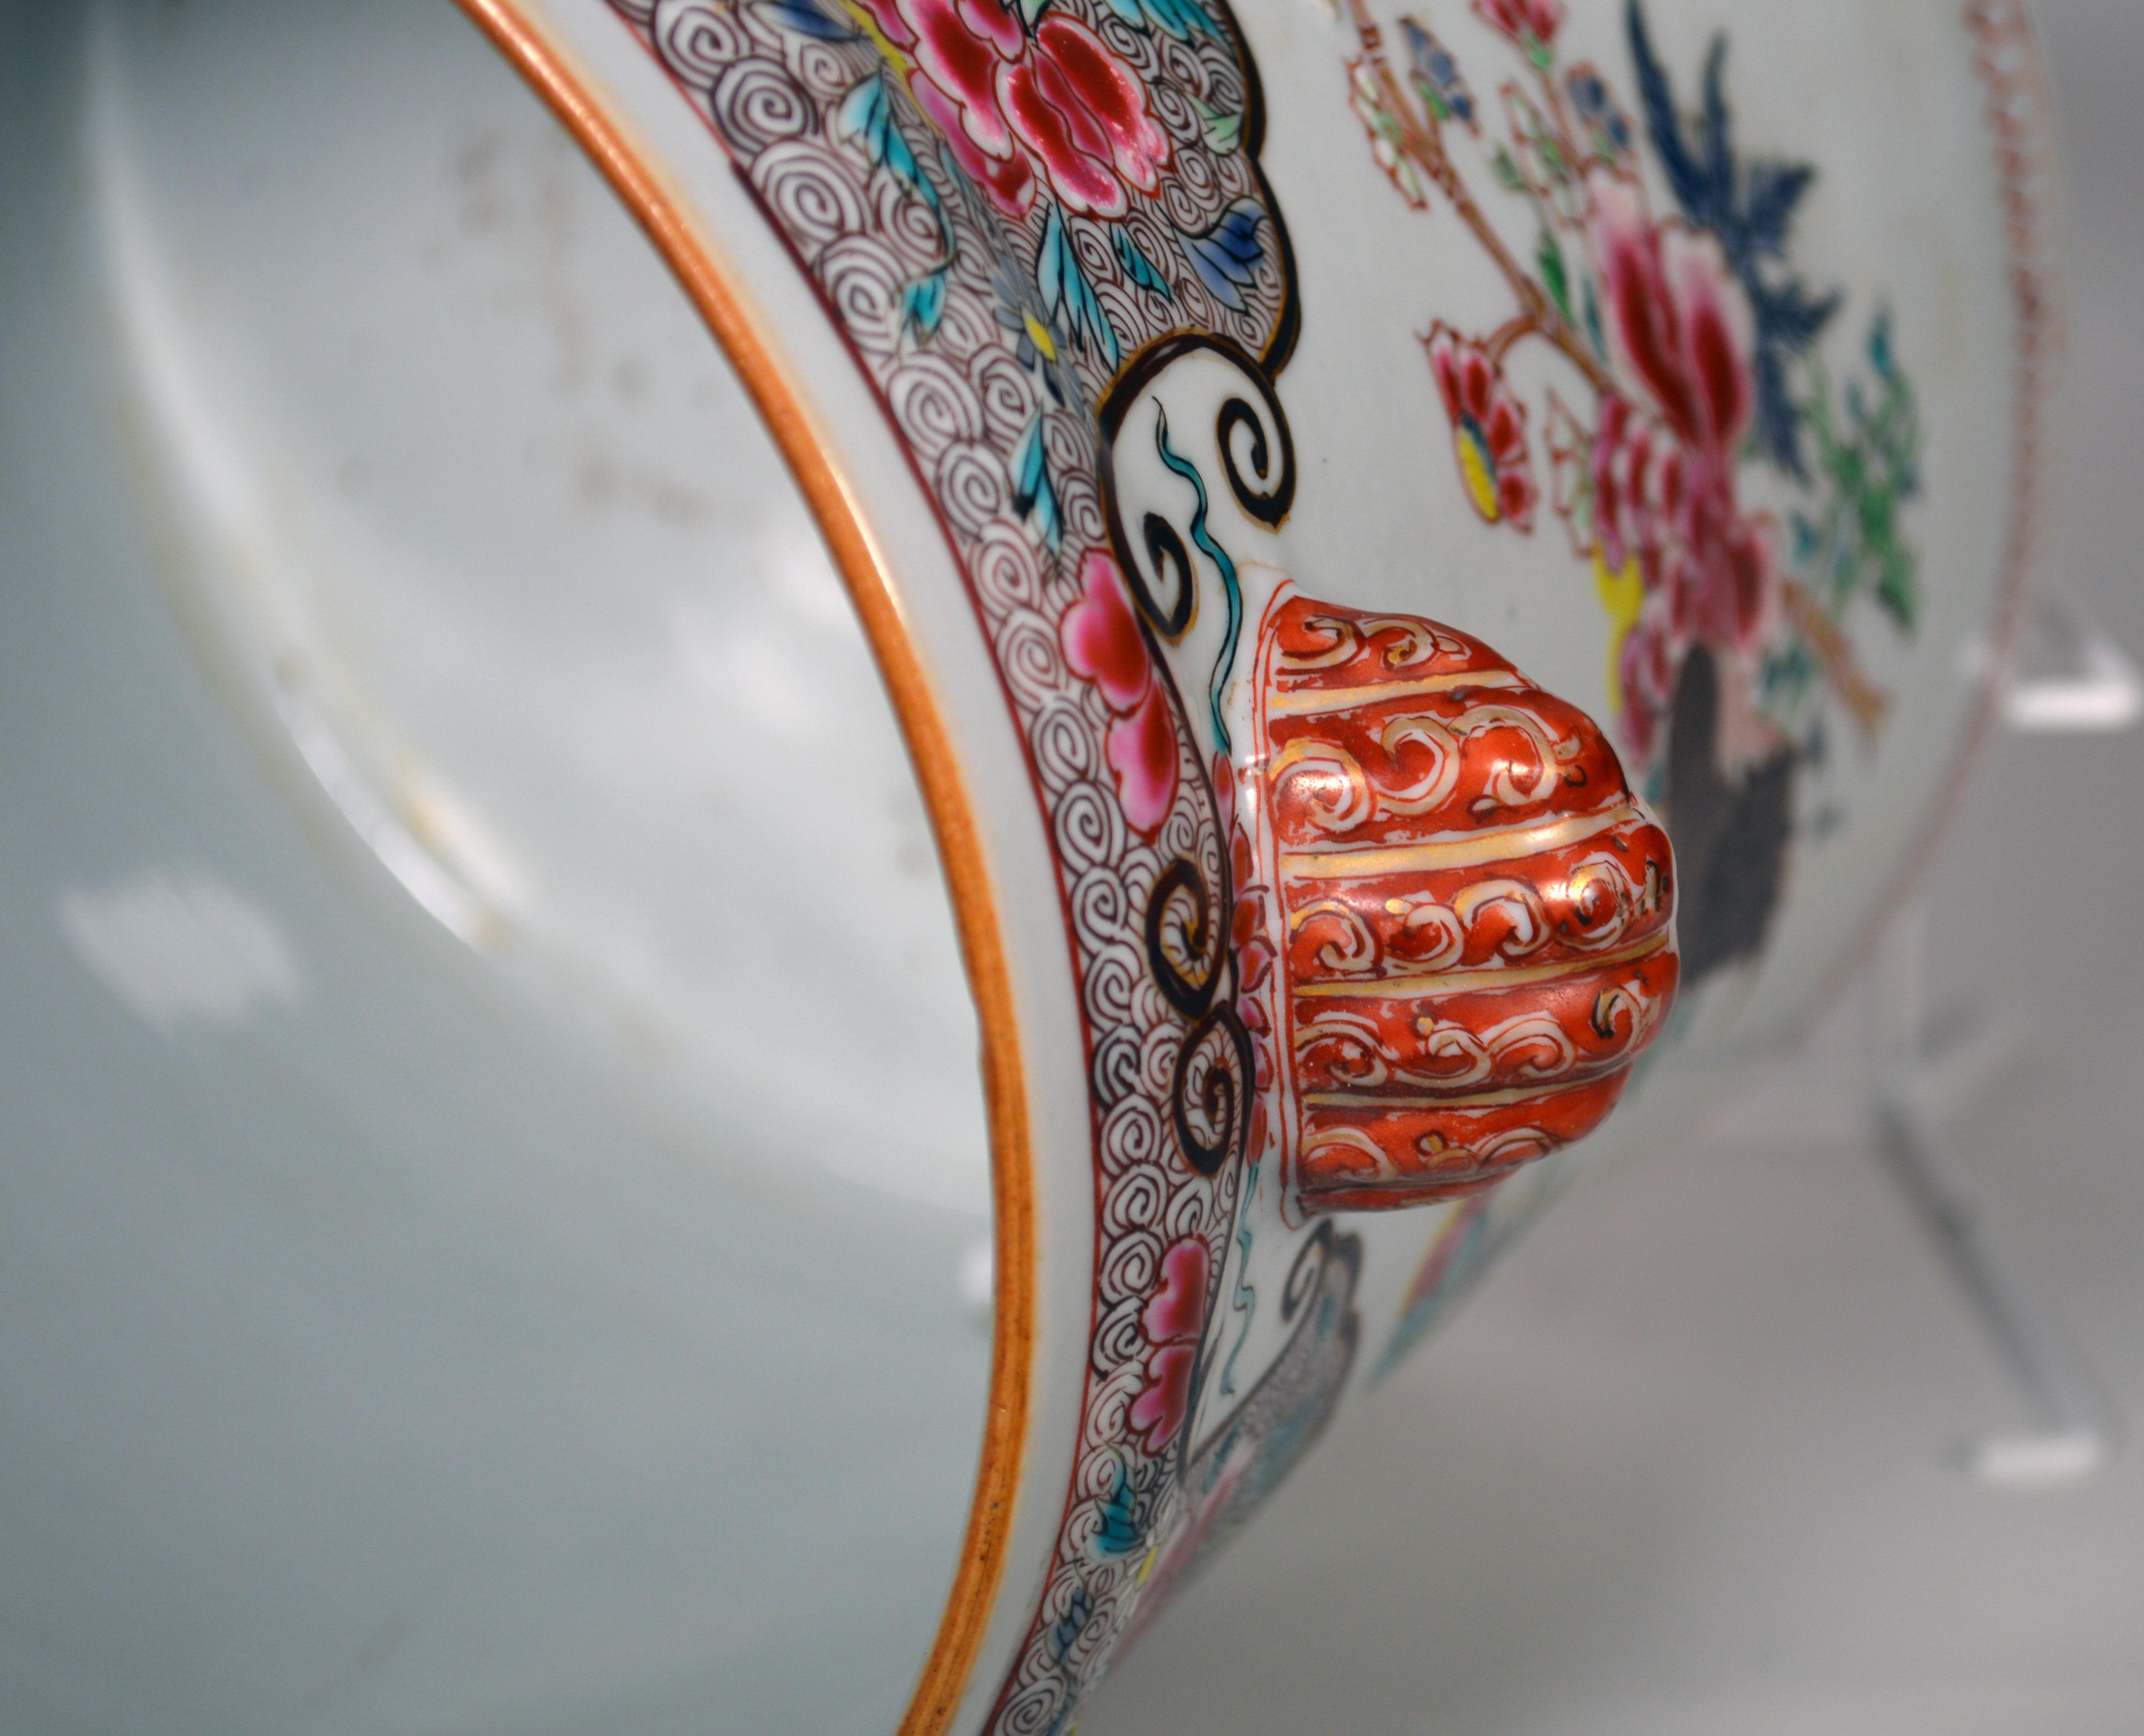 18th-century Chinese Export Porcelain Large Famille Rose Cachepot In Good Condition For Sale In Downingtown, PA